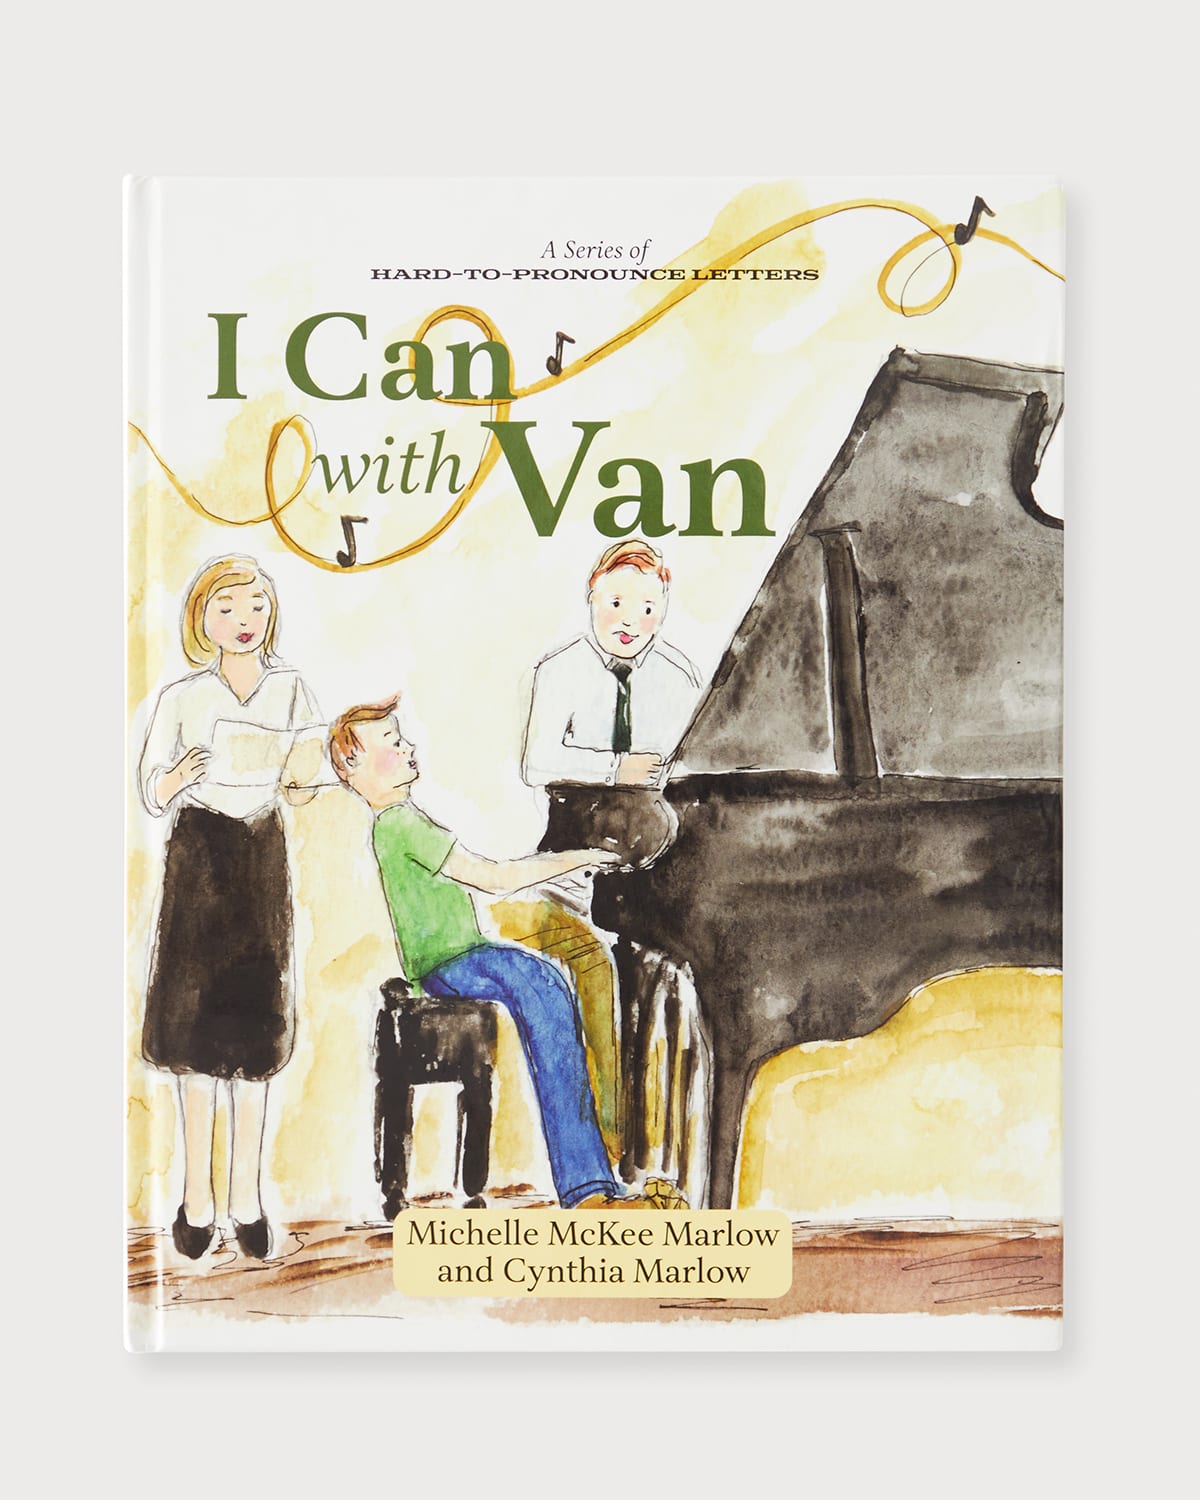 Kid's "I Can With Van" Book by Michelle McKee Marlow and Cynthia Marlow